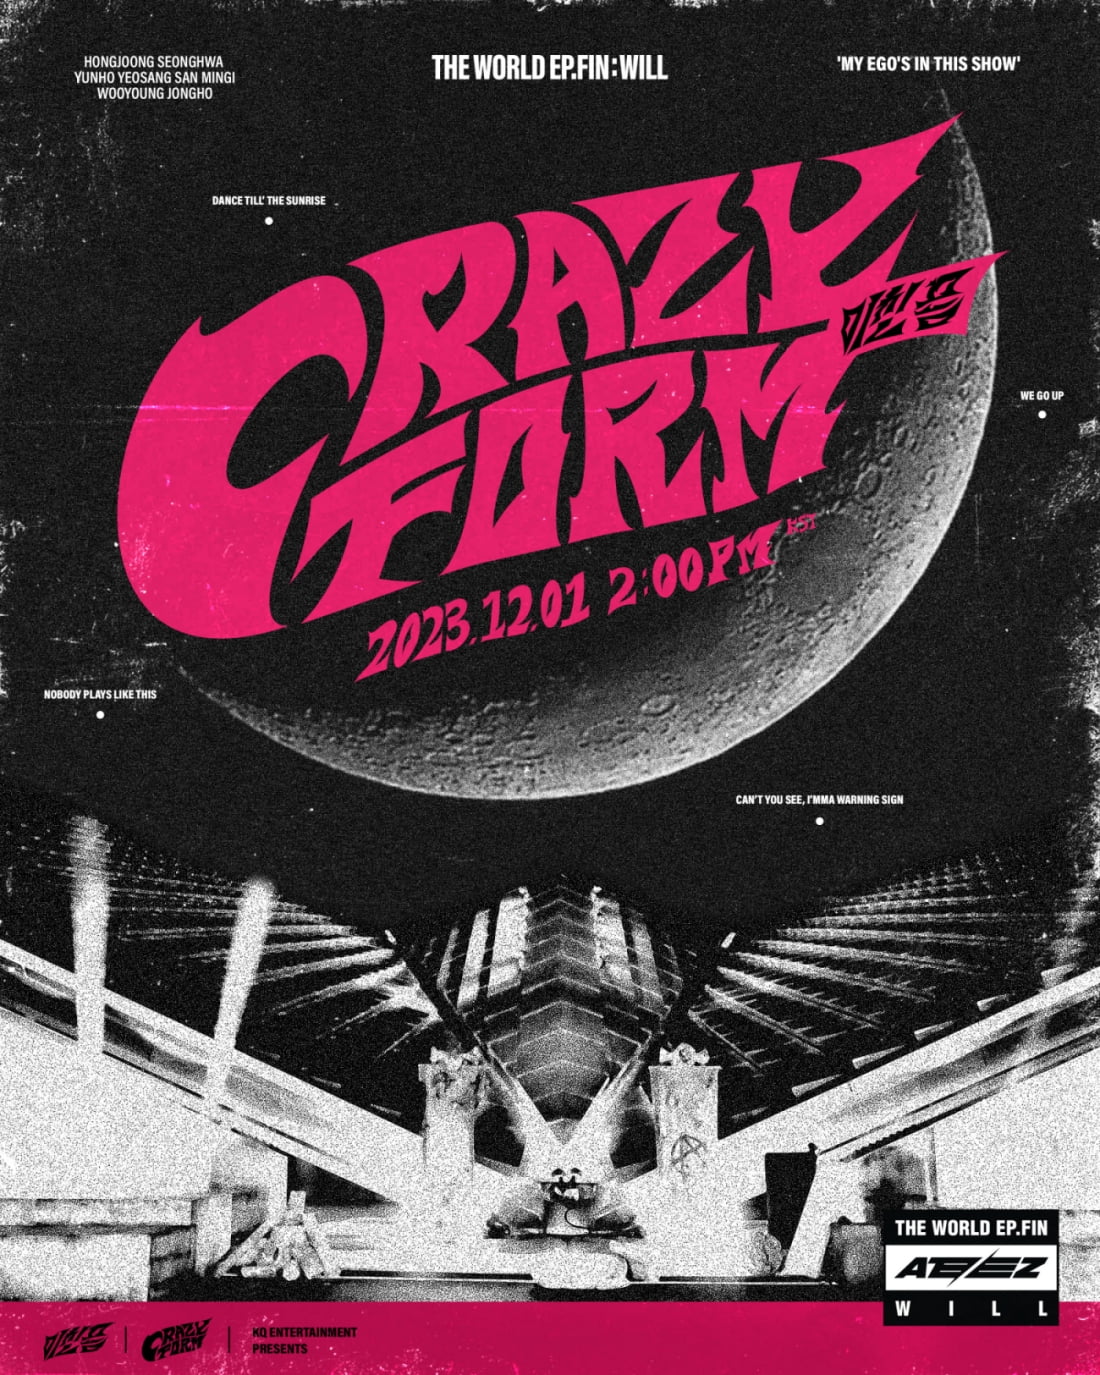 ATEEZ, the title song of their 2nd full-length album is ‘Crazy Form’